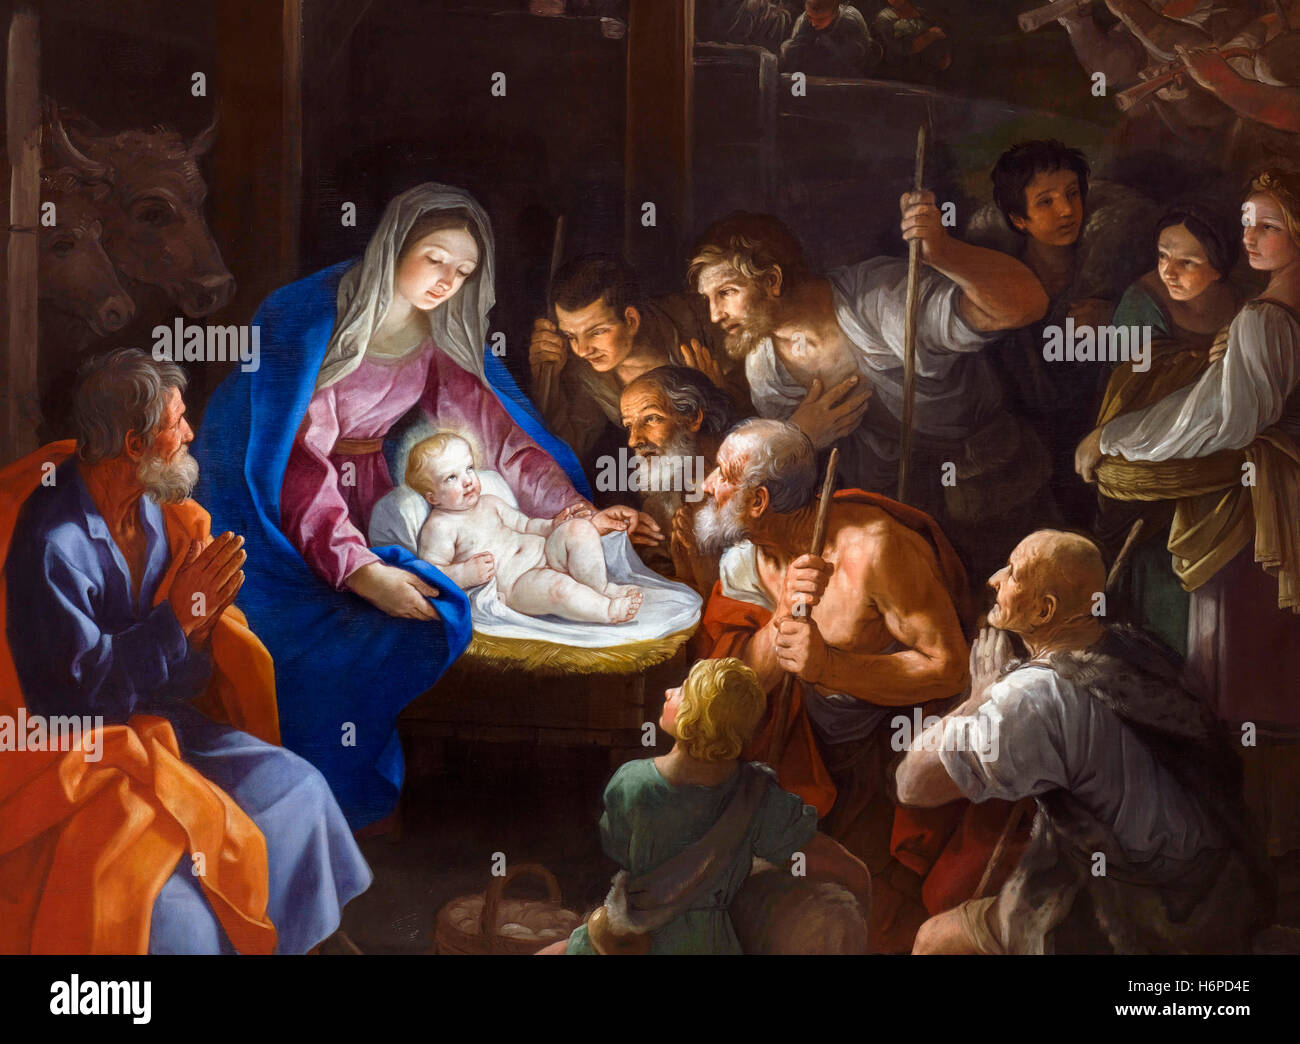 Nativity scene. 'The Adoration of the Shepherds' by Guido Reni (1575-1642), oil on canvas, 1640. This is a detail from a larger painting, G29XR6. It depicts a nativity scene with the baby Jesus being visited by shepherds. Stock Photo